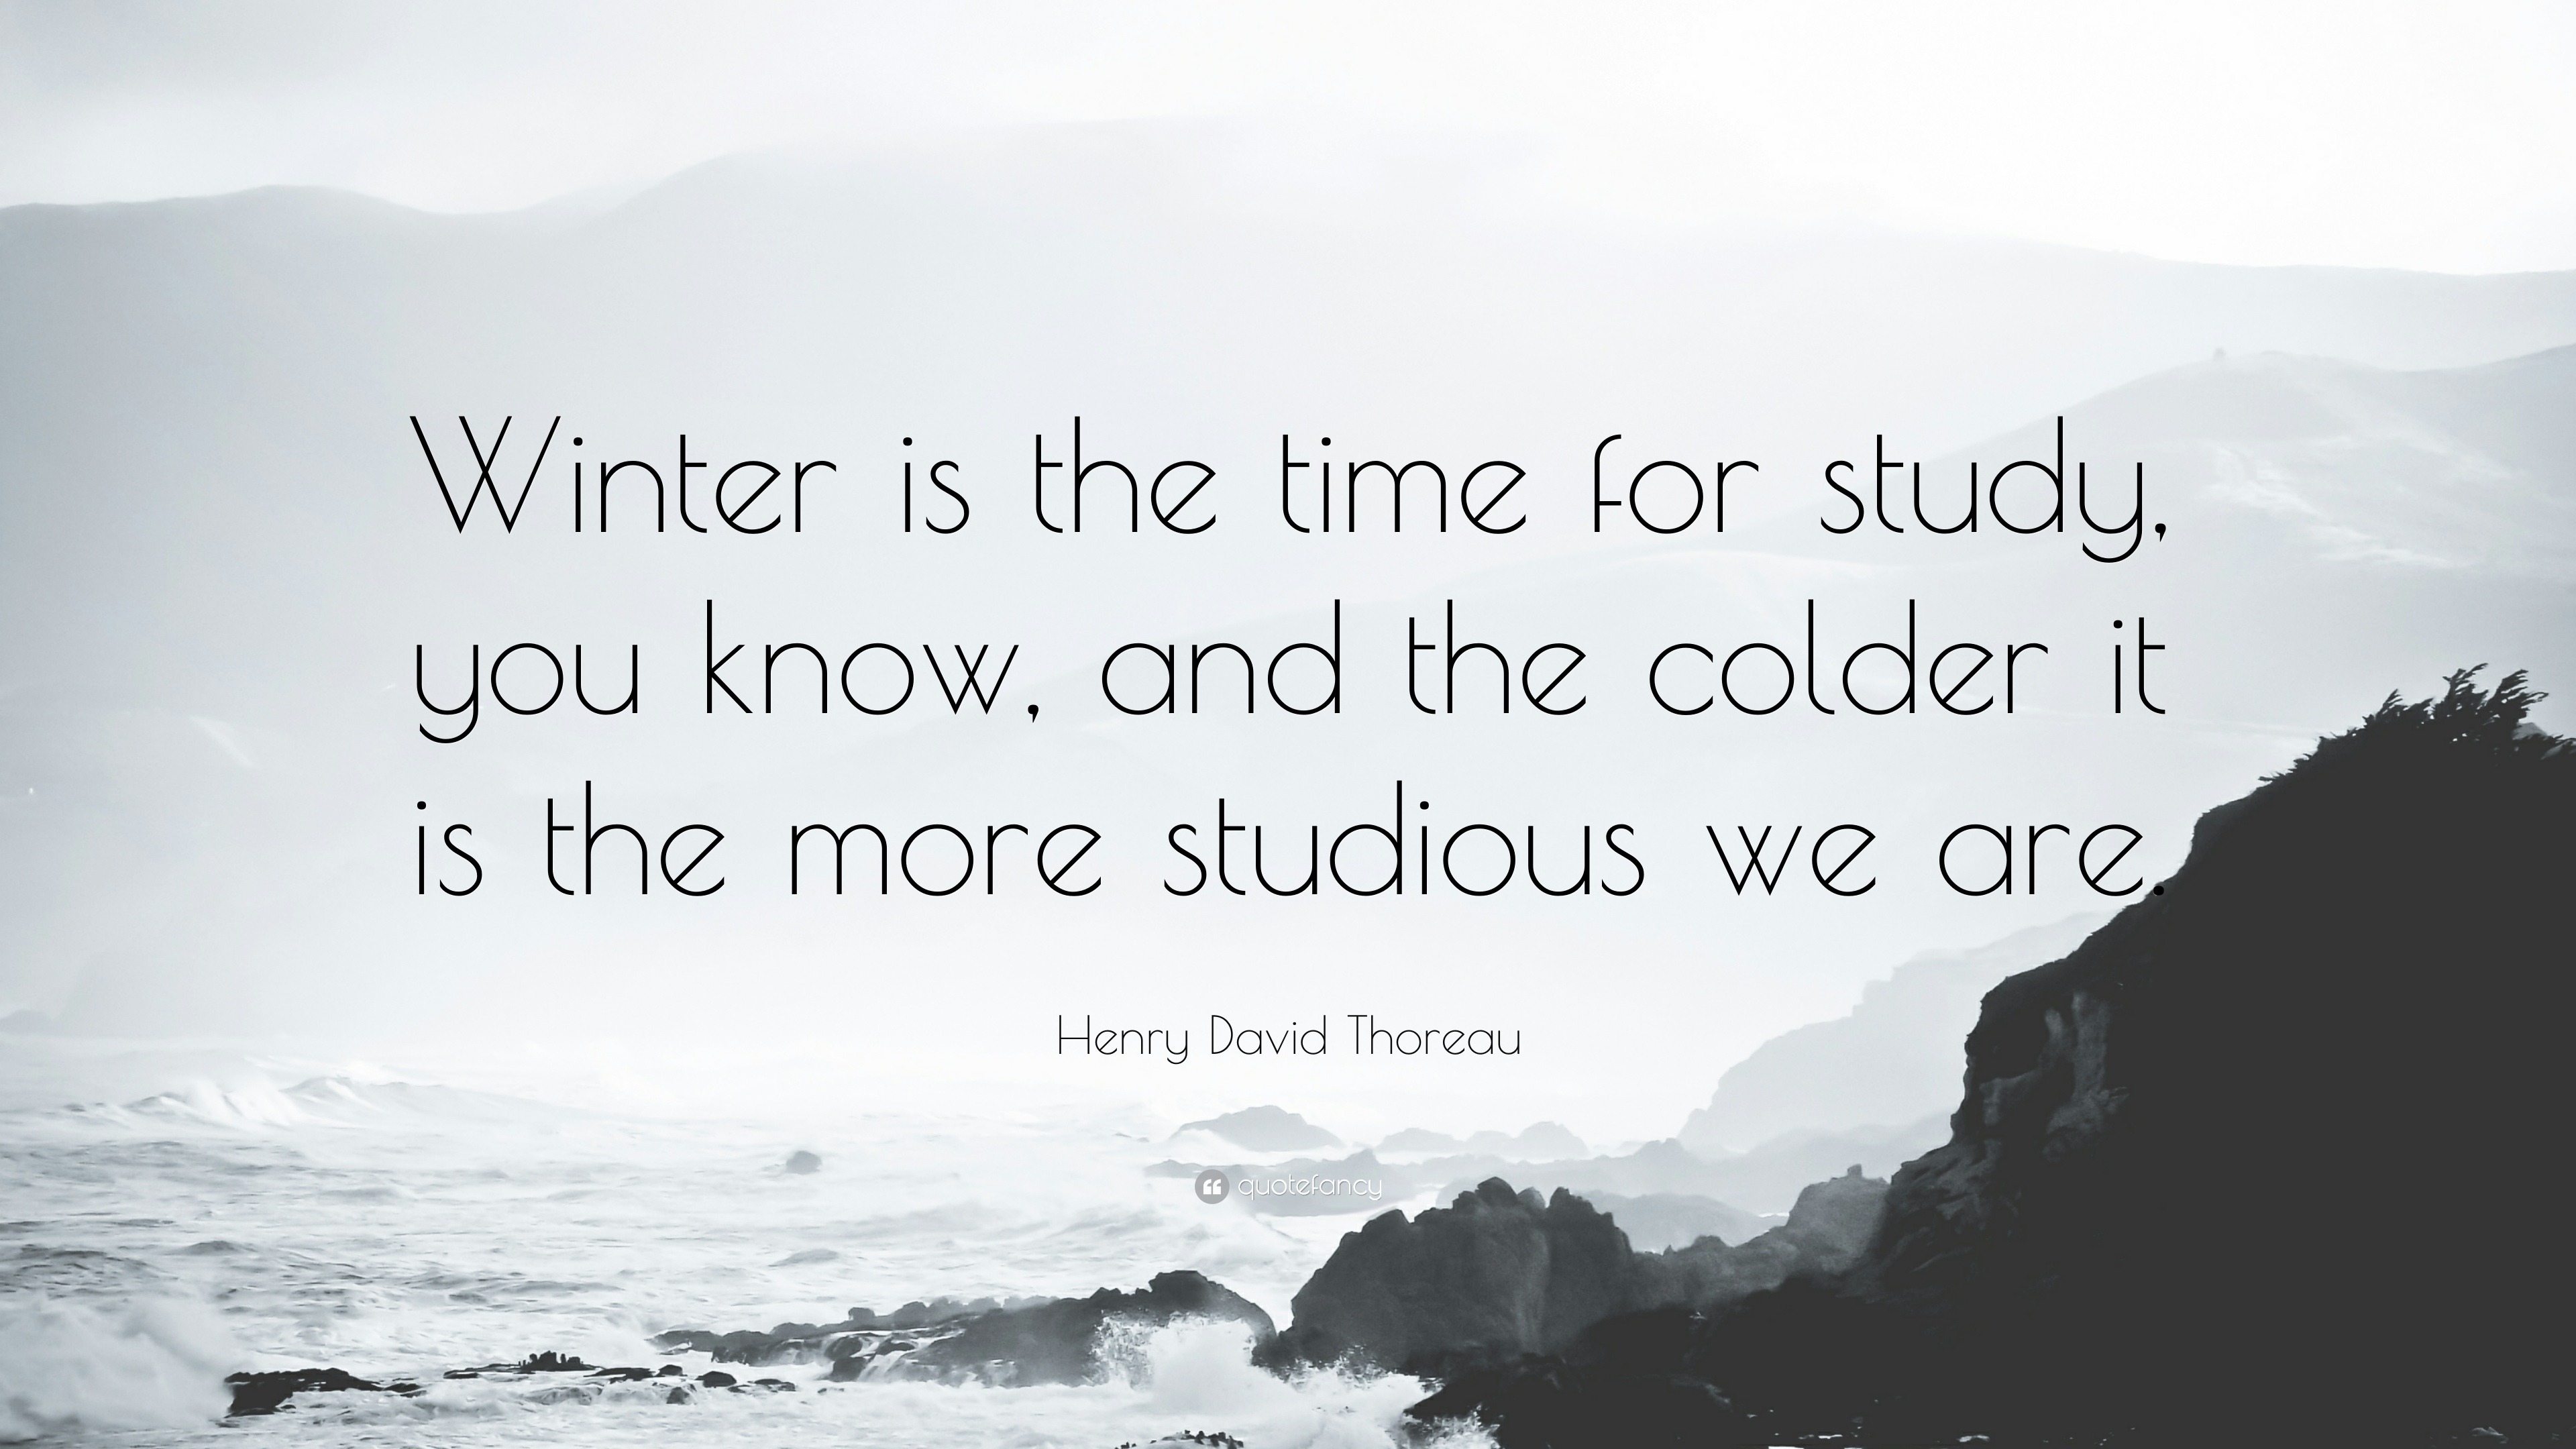 winter season quotes wallpapers